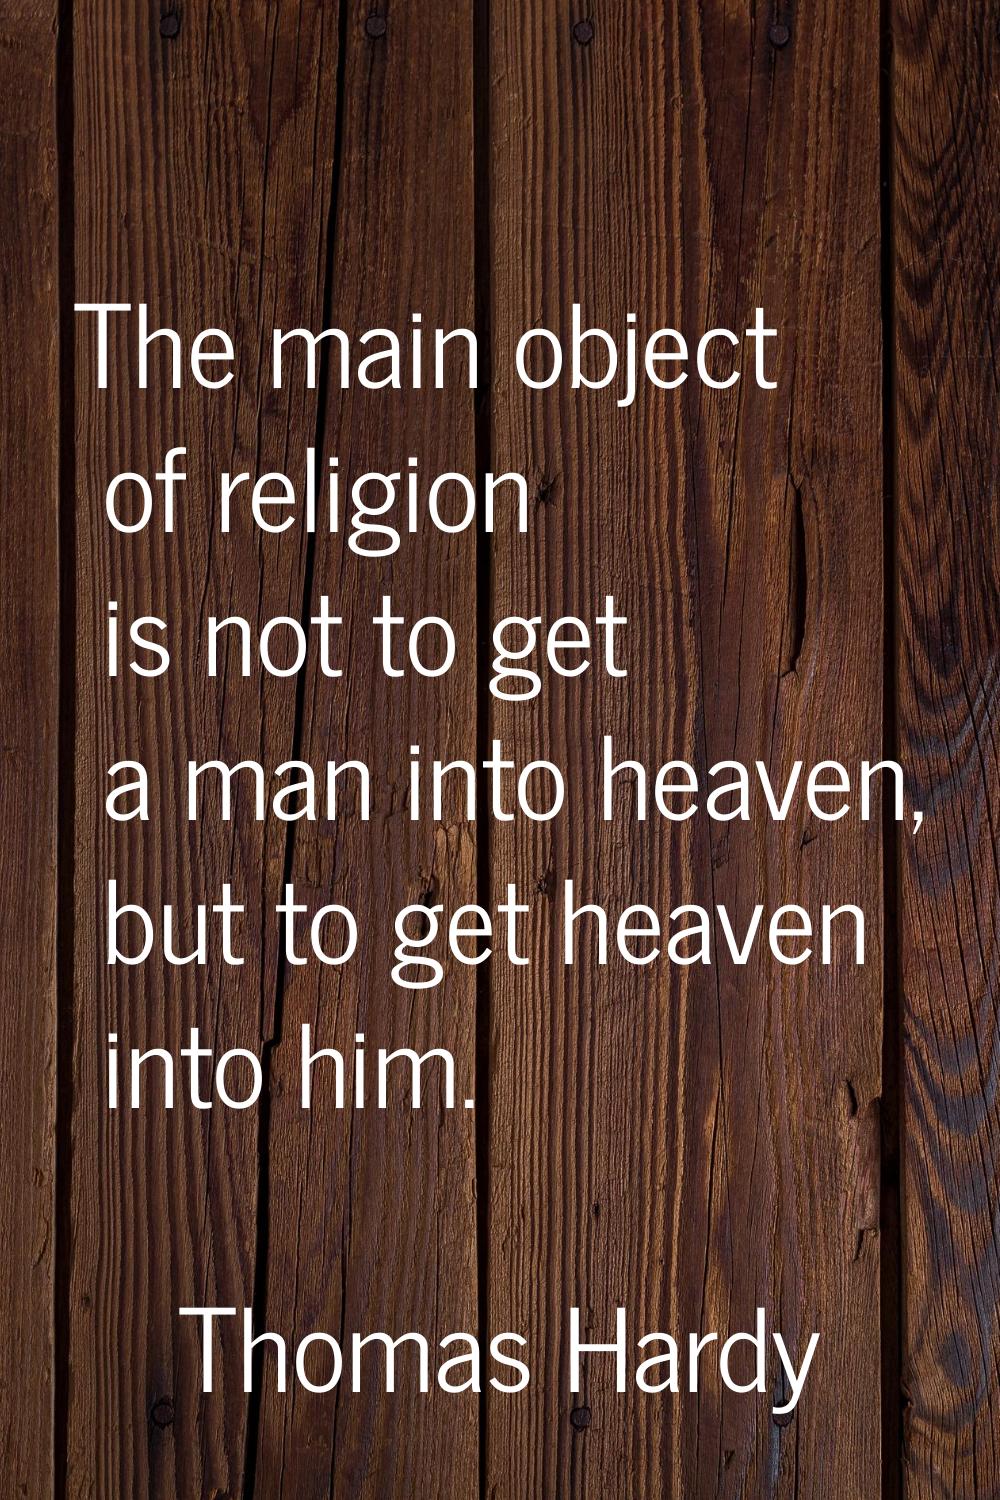 The main object of religion is not to get a man into heaven, but to get heaven into him.